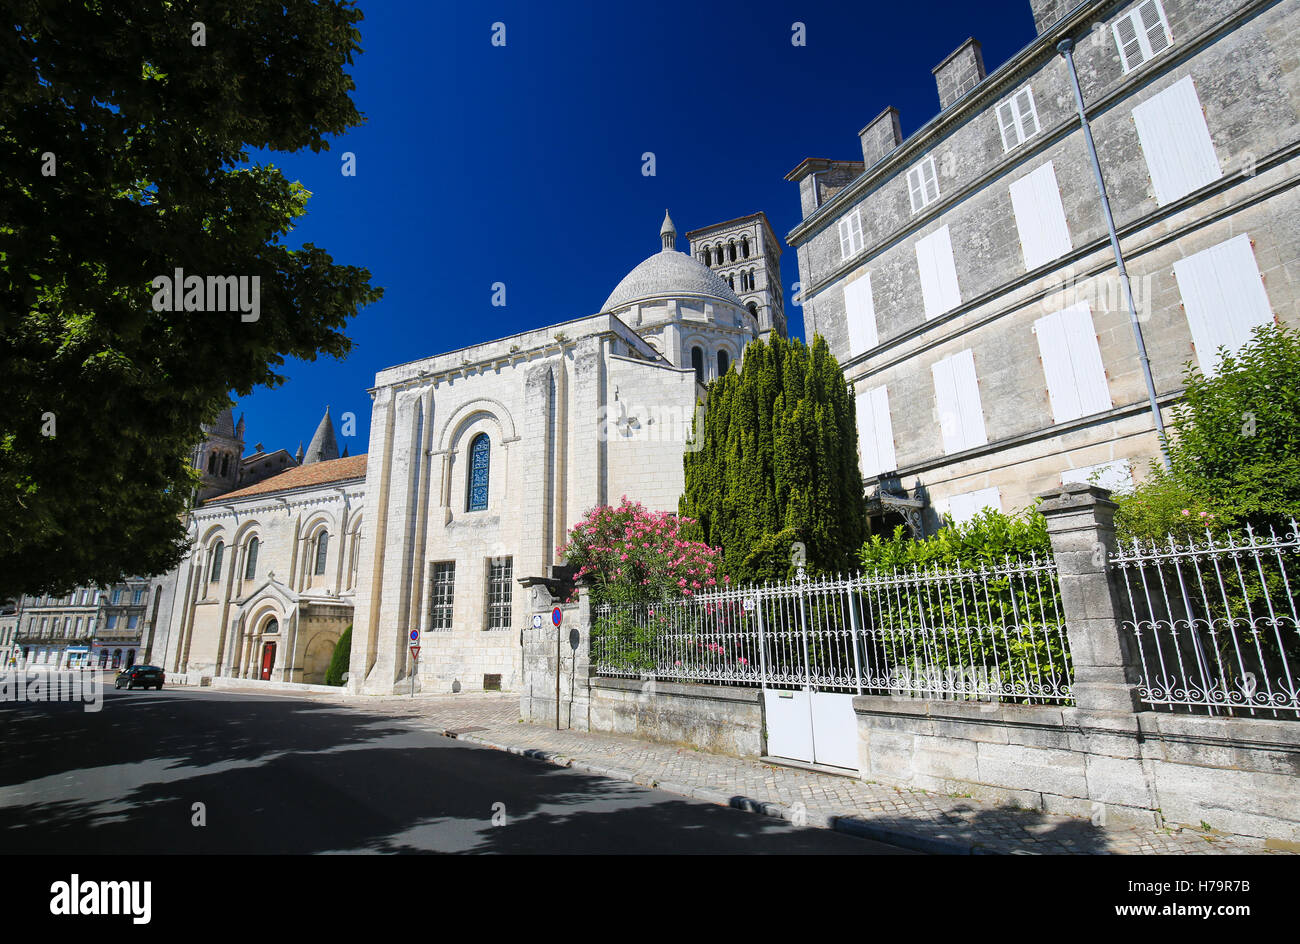 Romanesque Cathedral of Angouleme, capital of the Charente department in France. Stock Photo